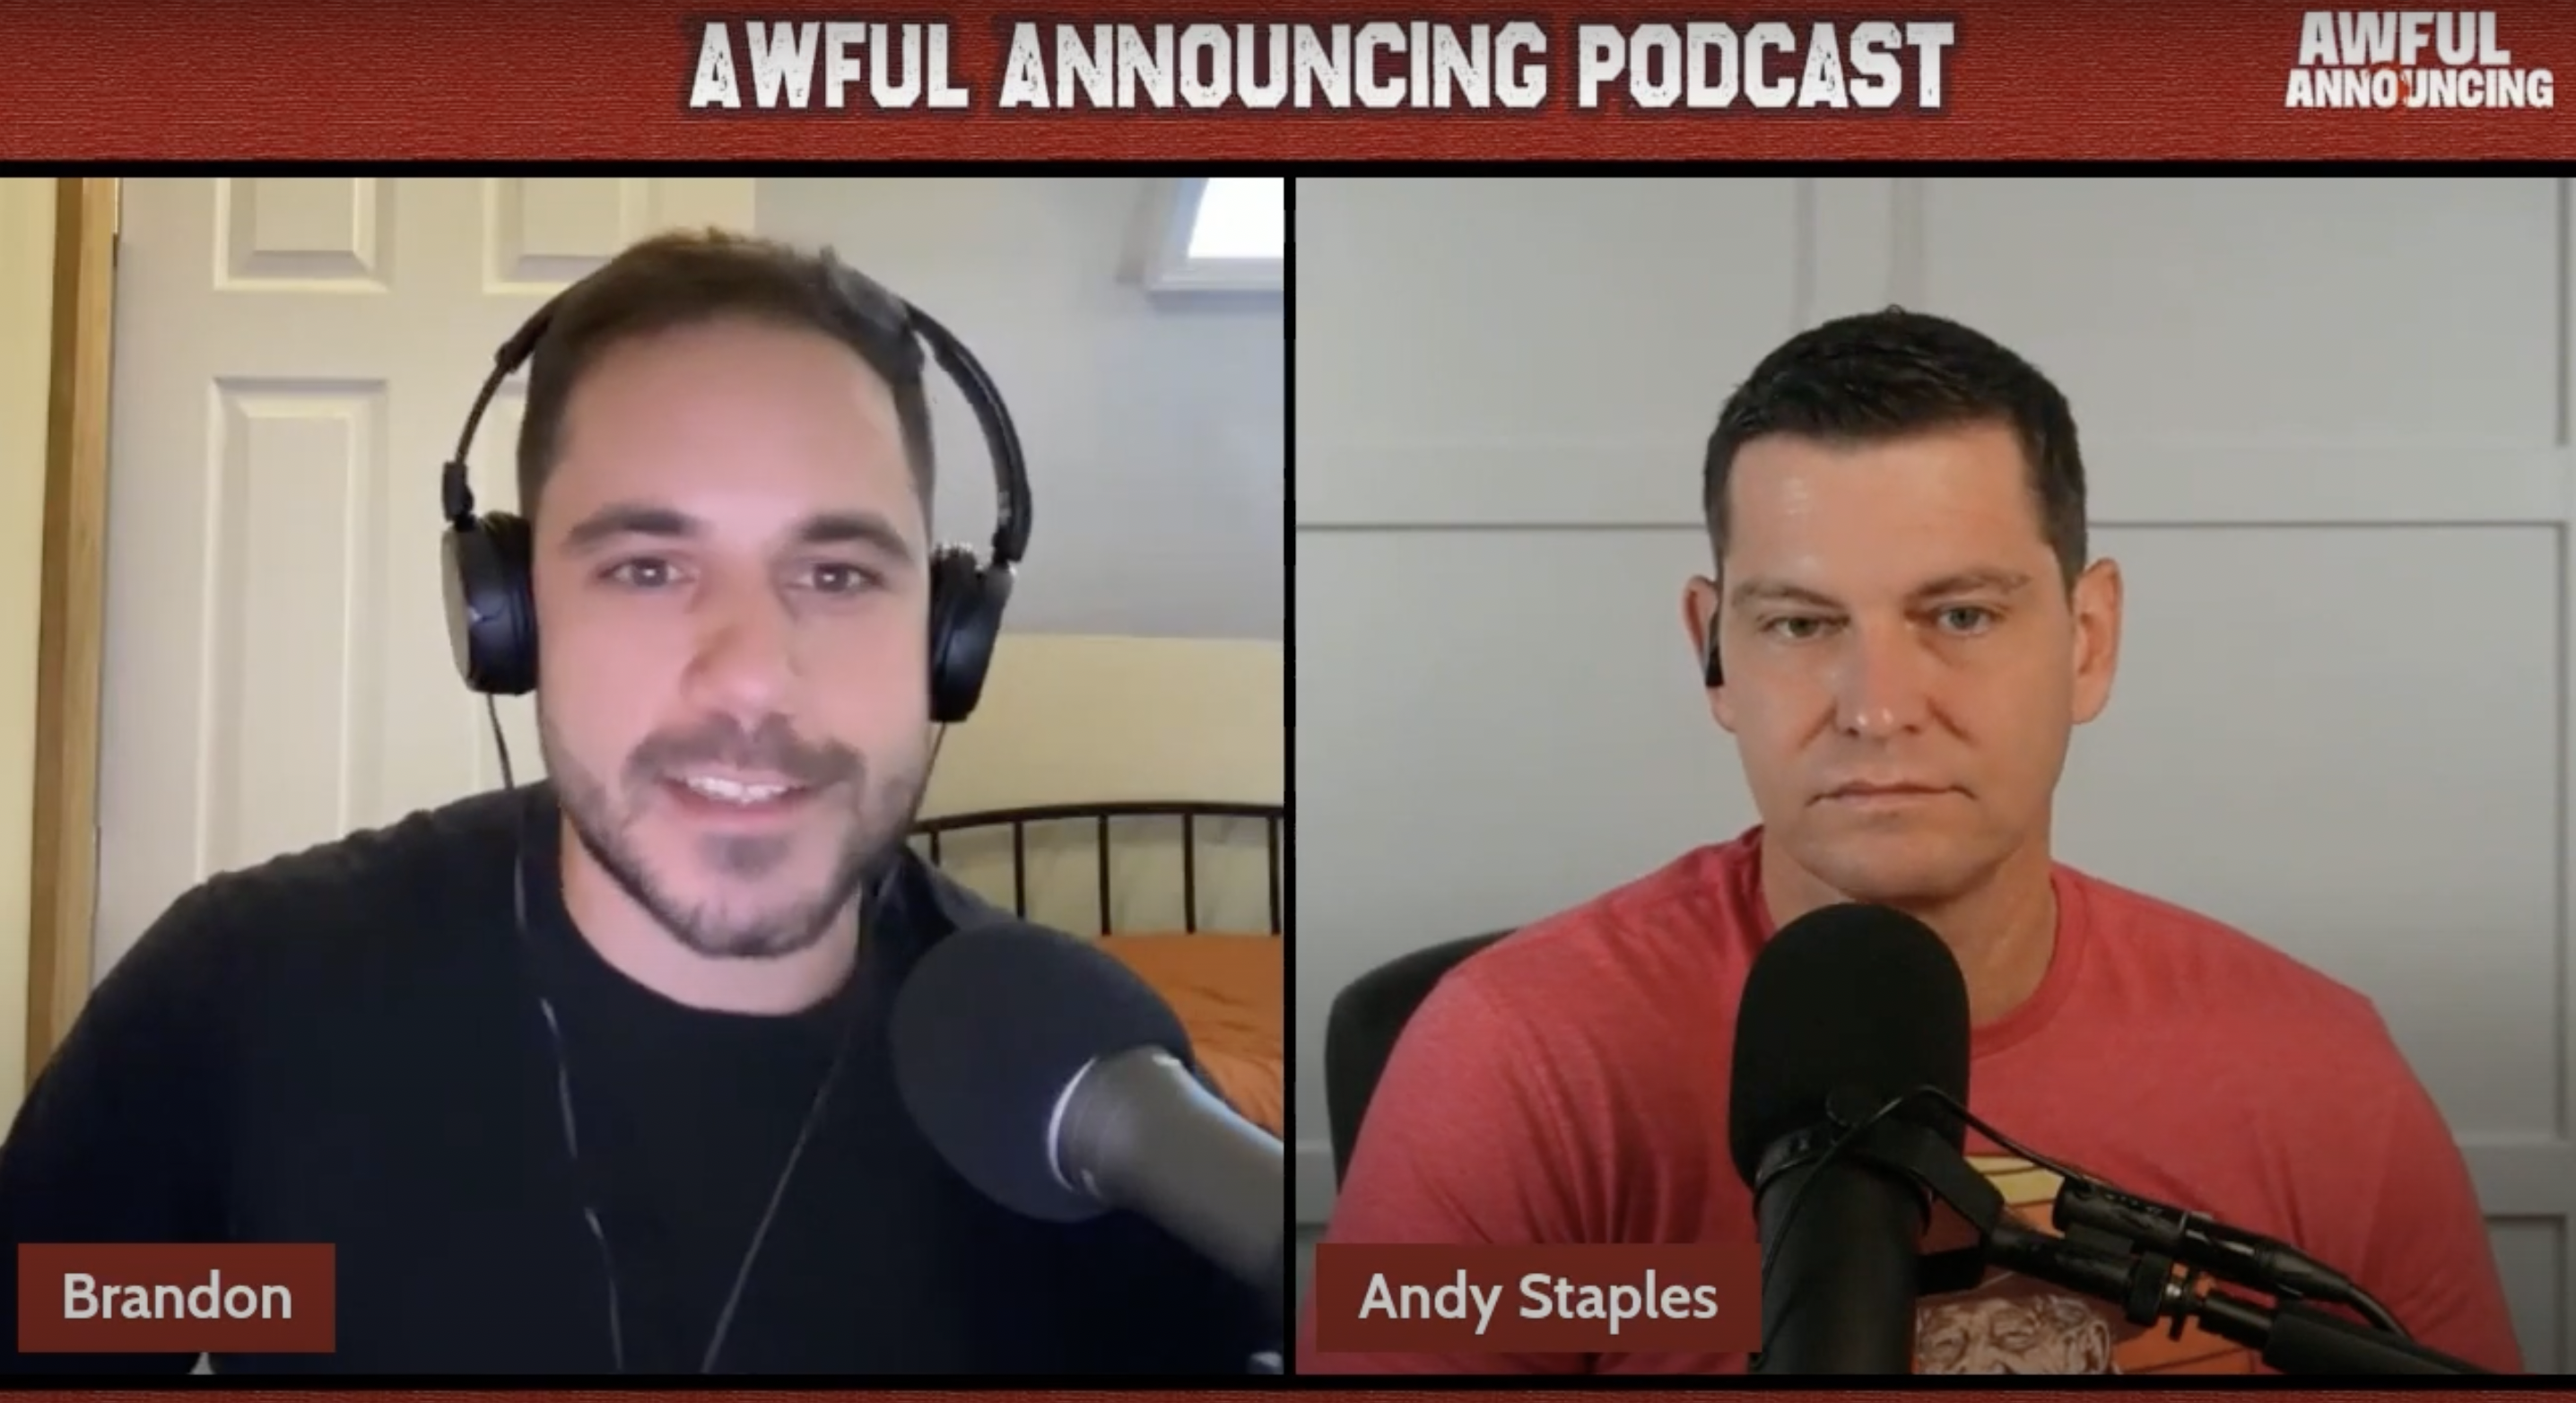 Andy Staples on the Awful Announcing podcast discussing Pac-12 conference realignment